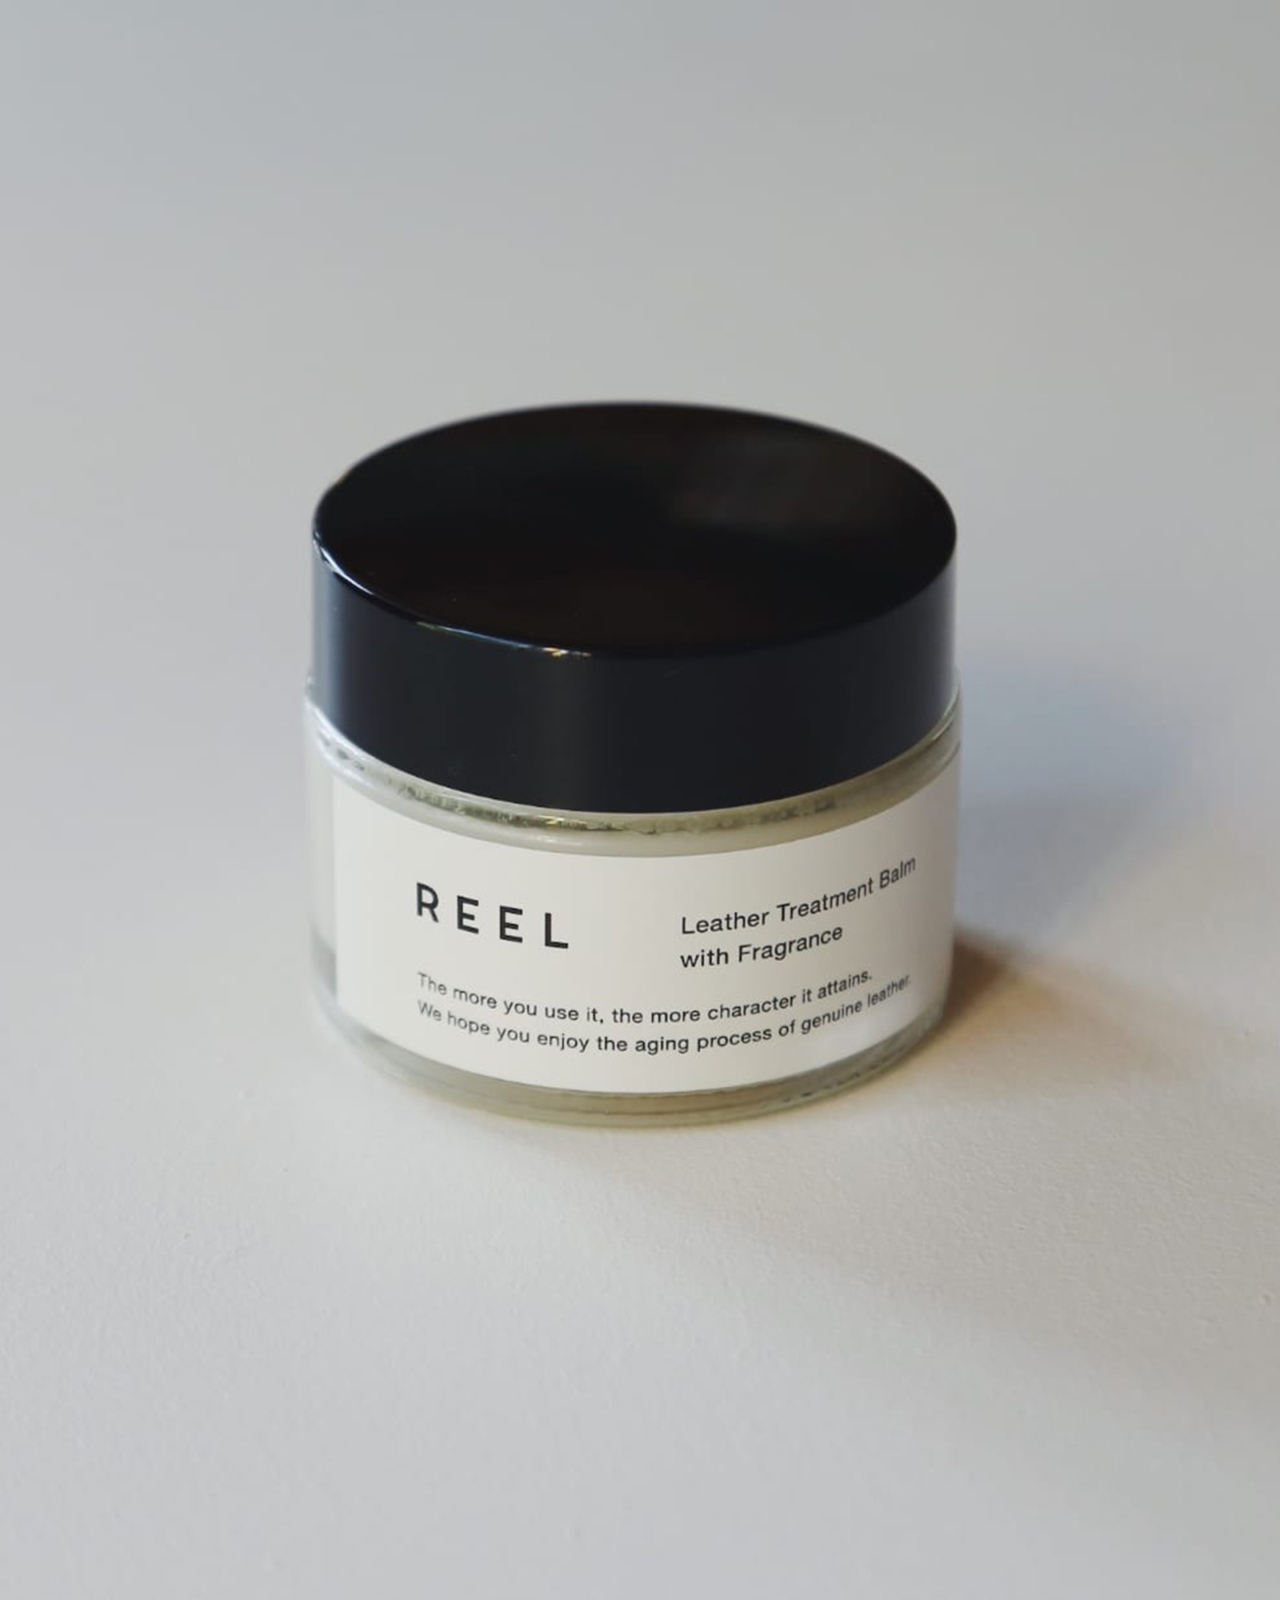 REEL Leather Treatment Balm -with Fragrance-